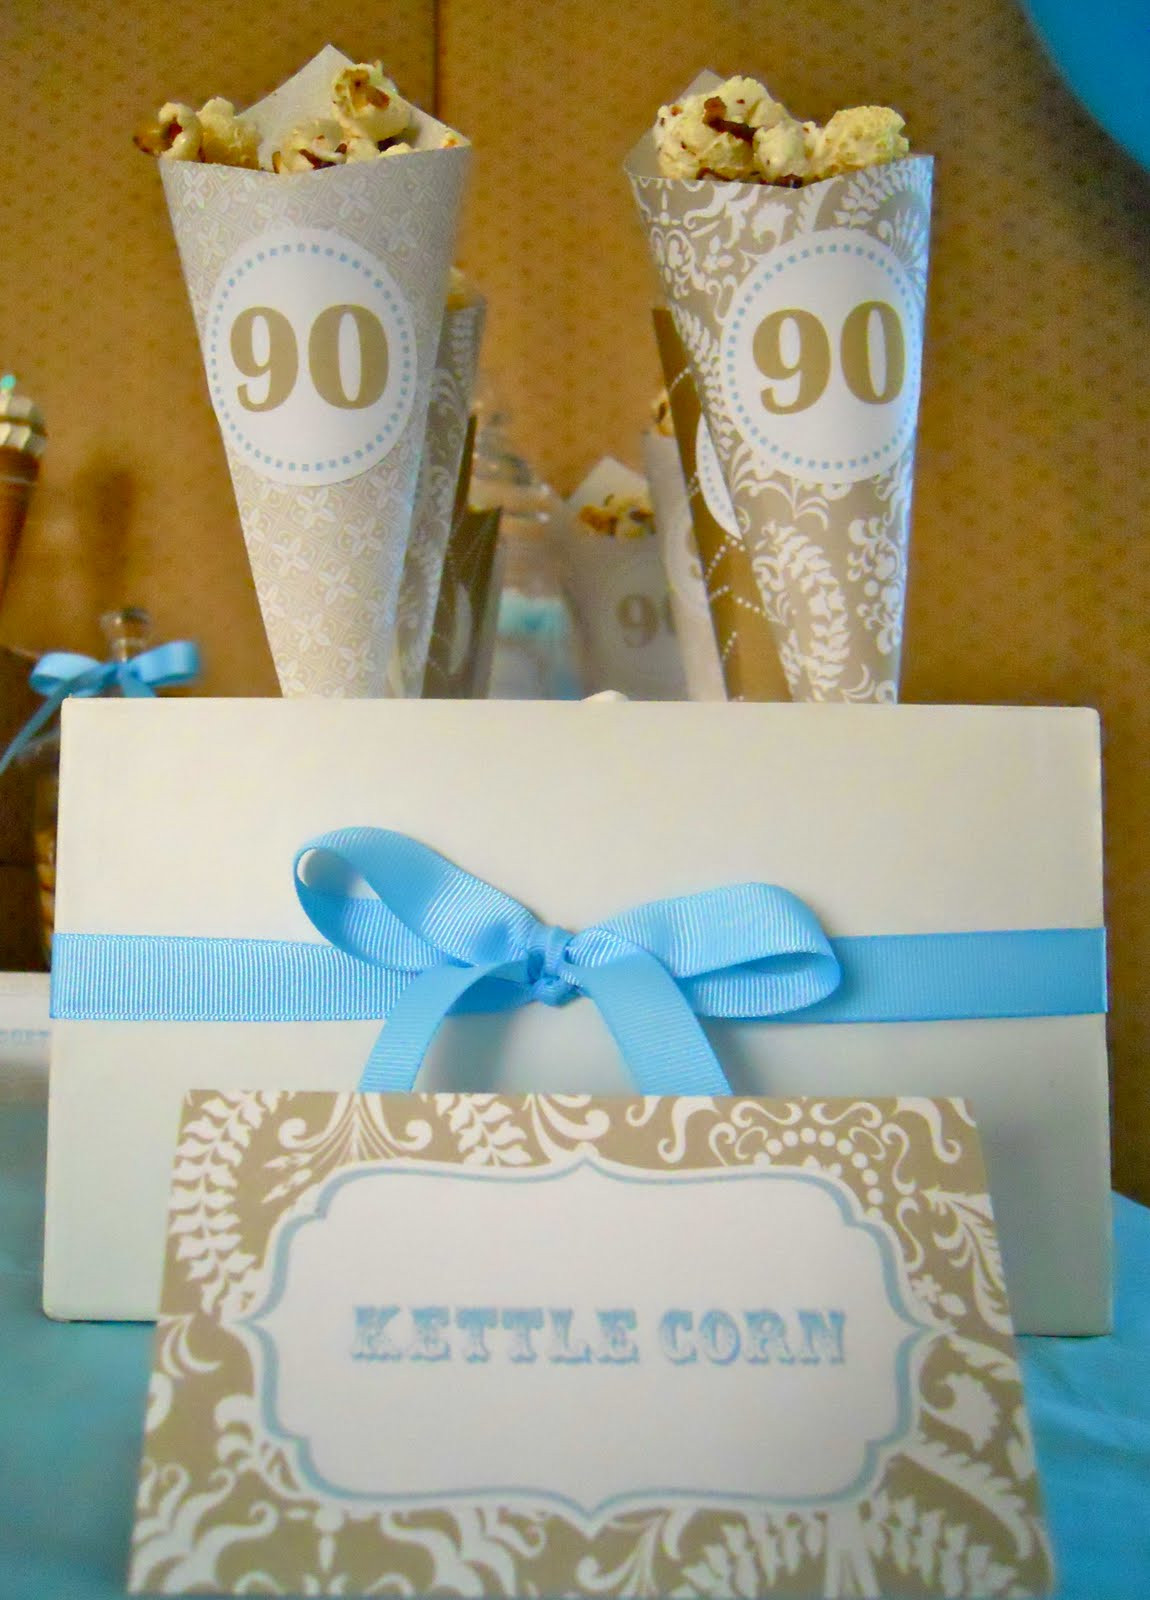 90th Birthday Party Ideas
 Oh Sugar Events 90th Birthday Party